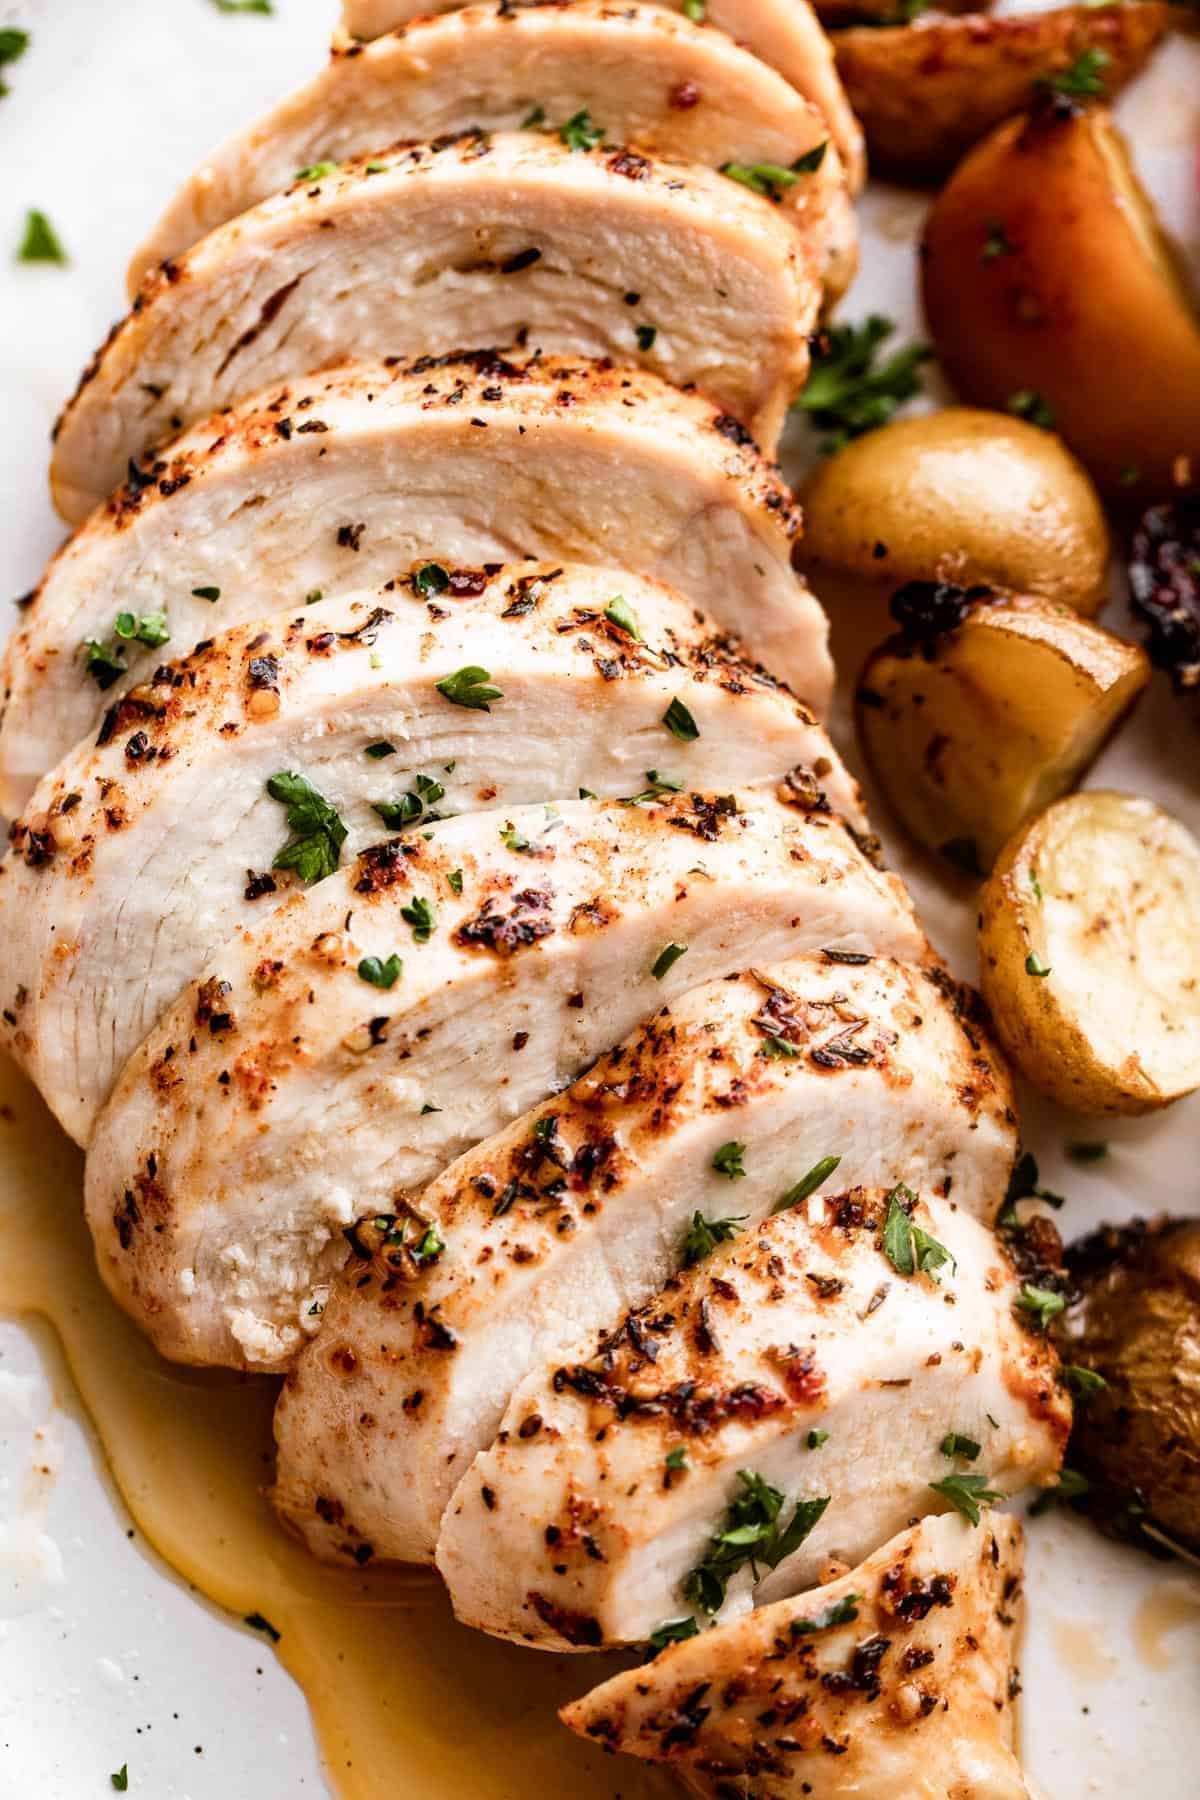 Gluten-Free Slow Cooker Chicken Breast with potatoes on a white plate.